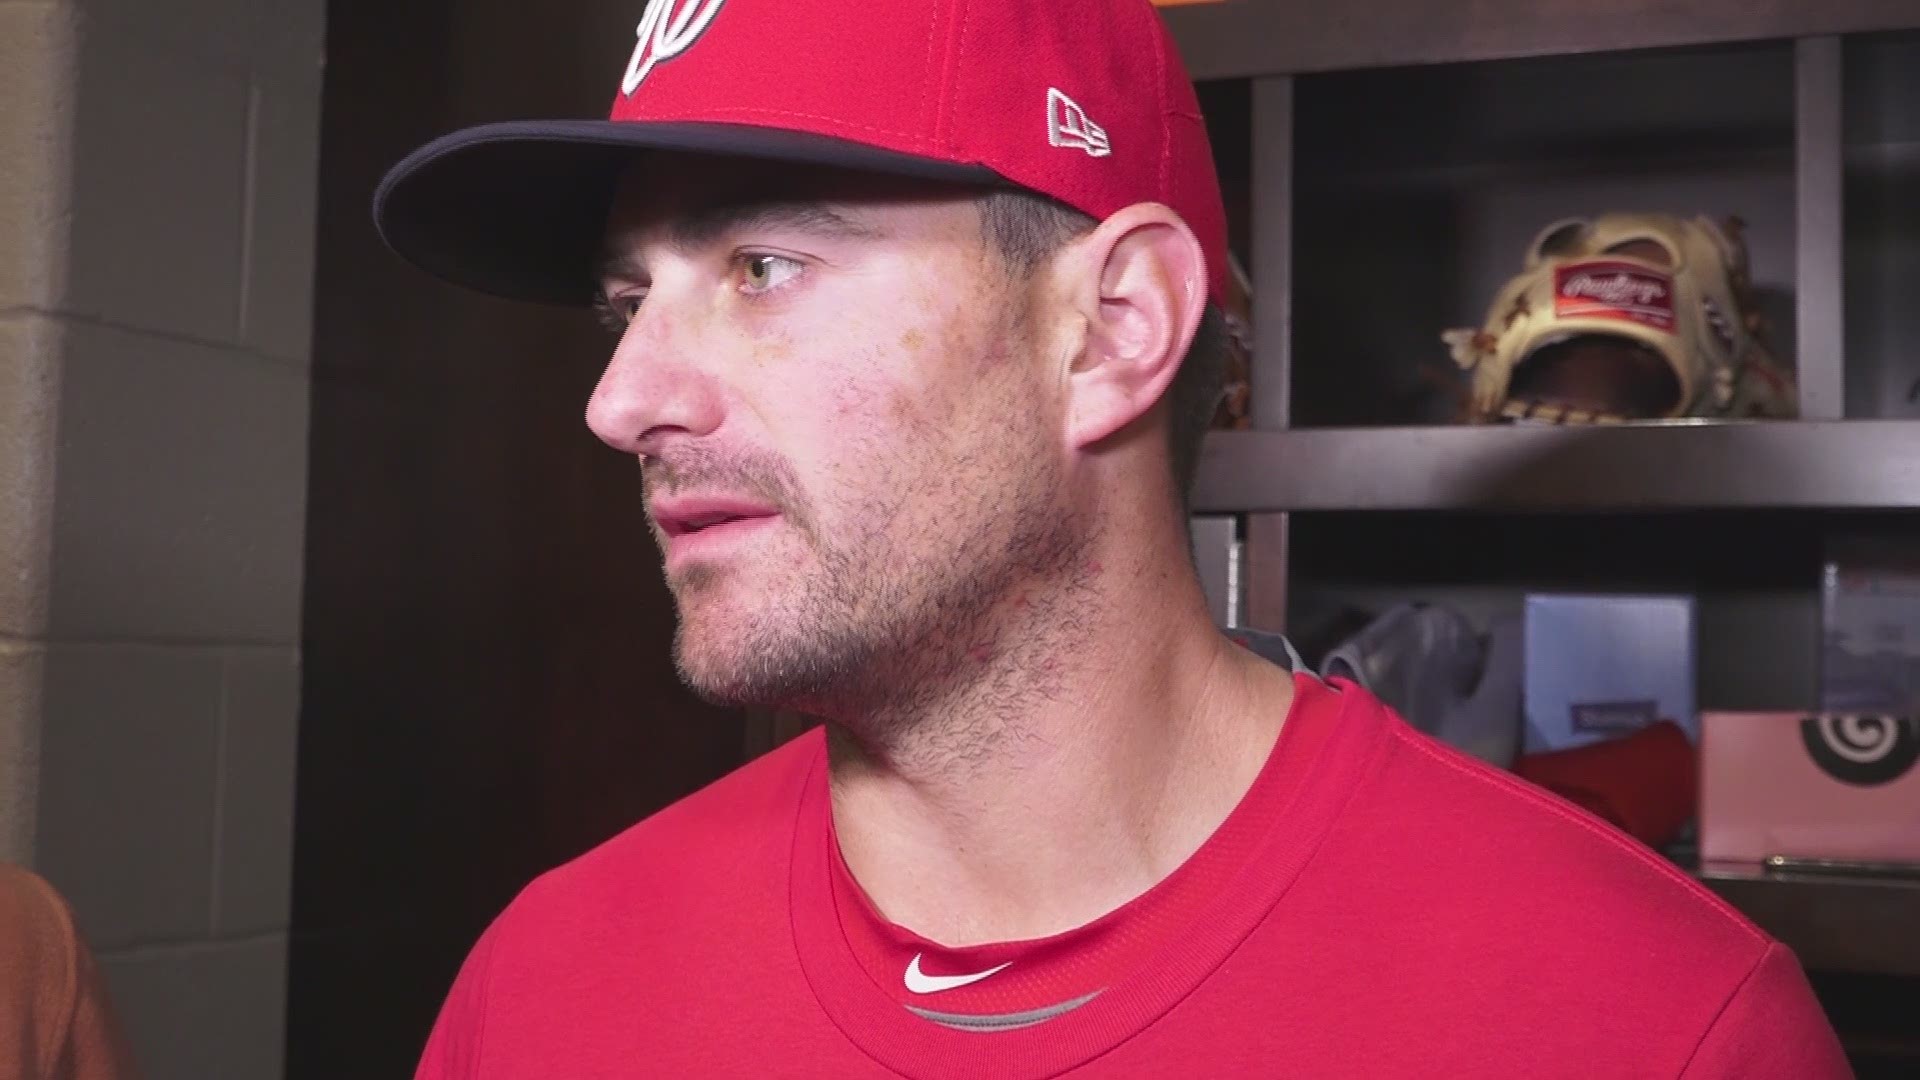 Ryan Zimmerman and Daniel Hudson have played major roles for the Nationals. They still have work to to do.